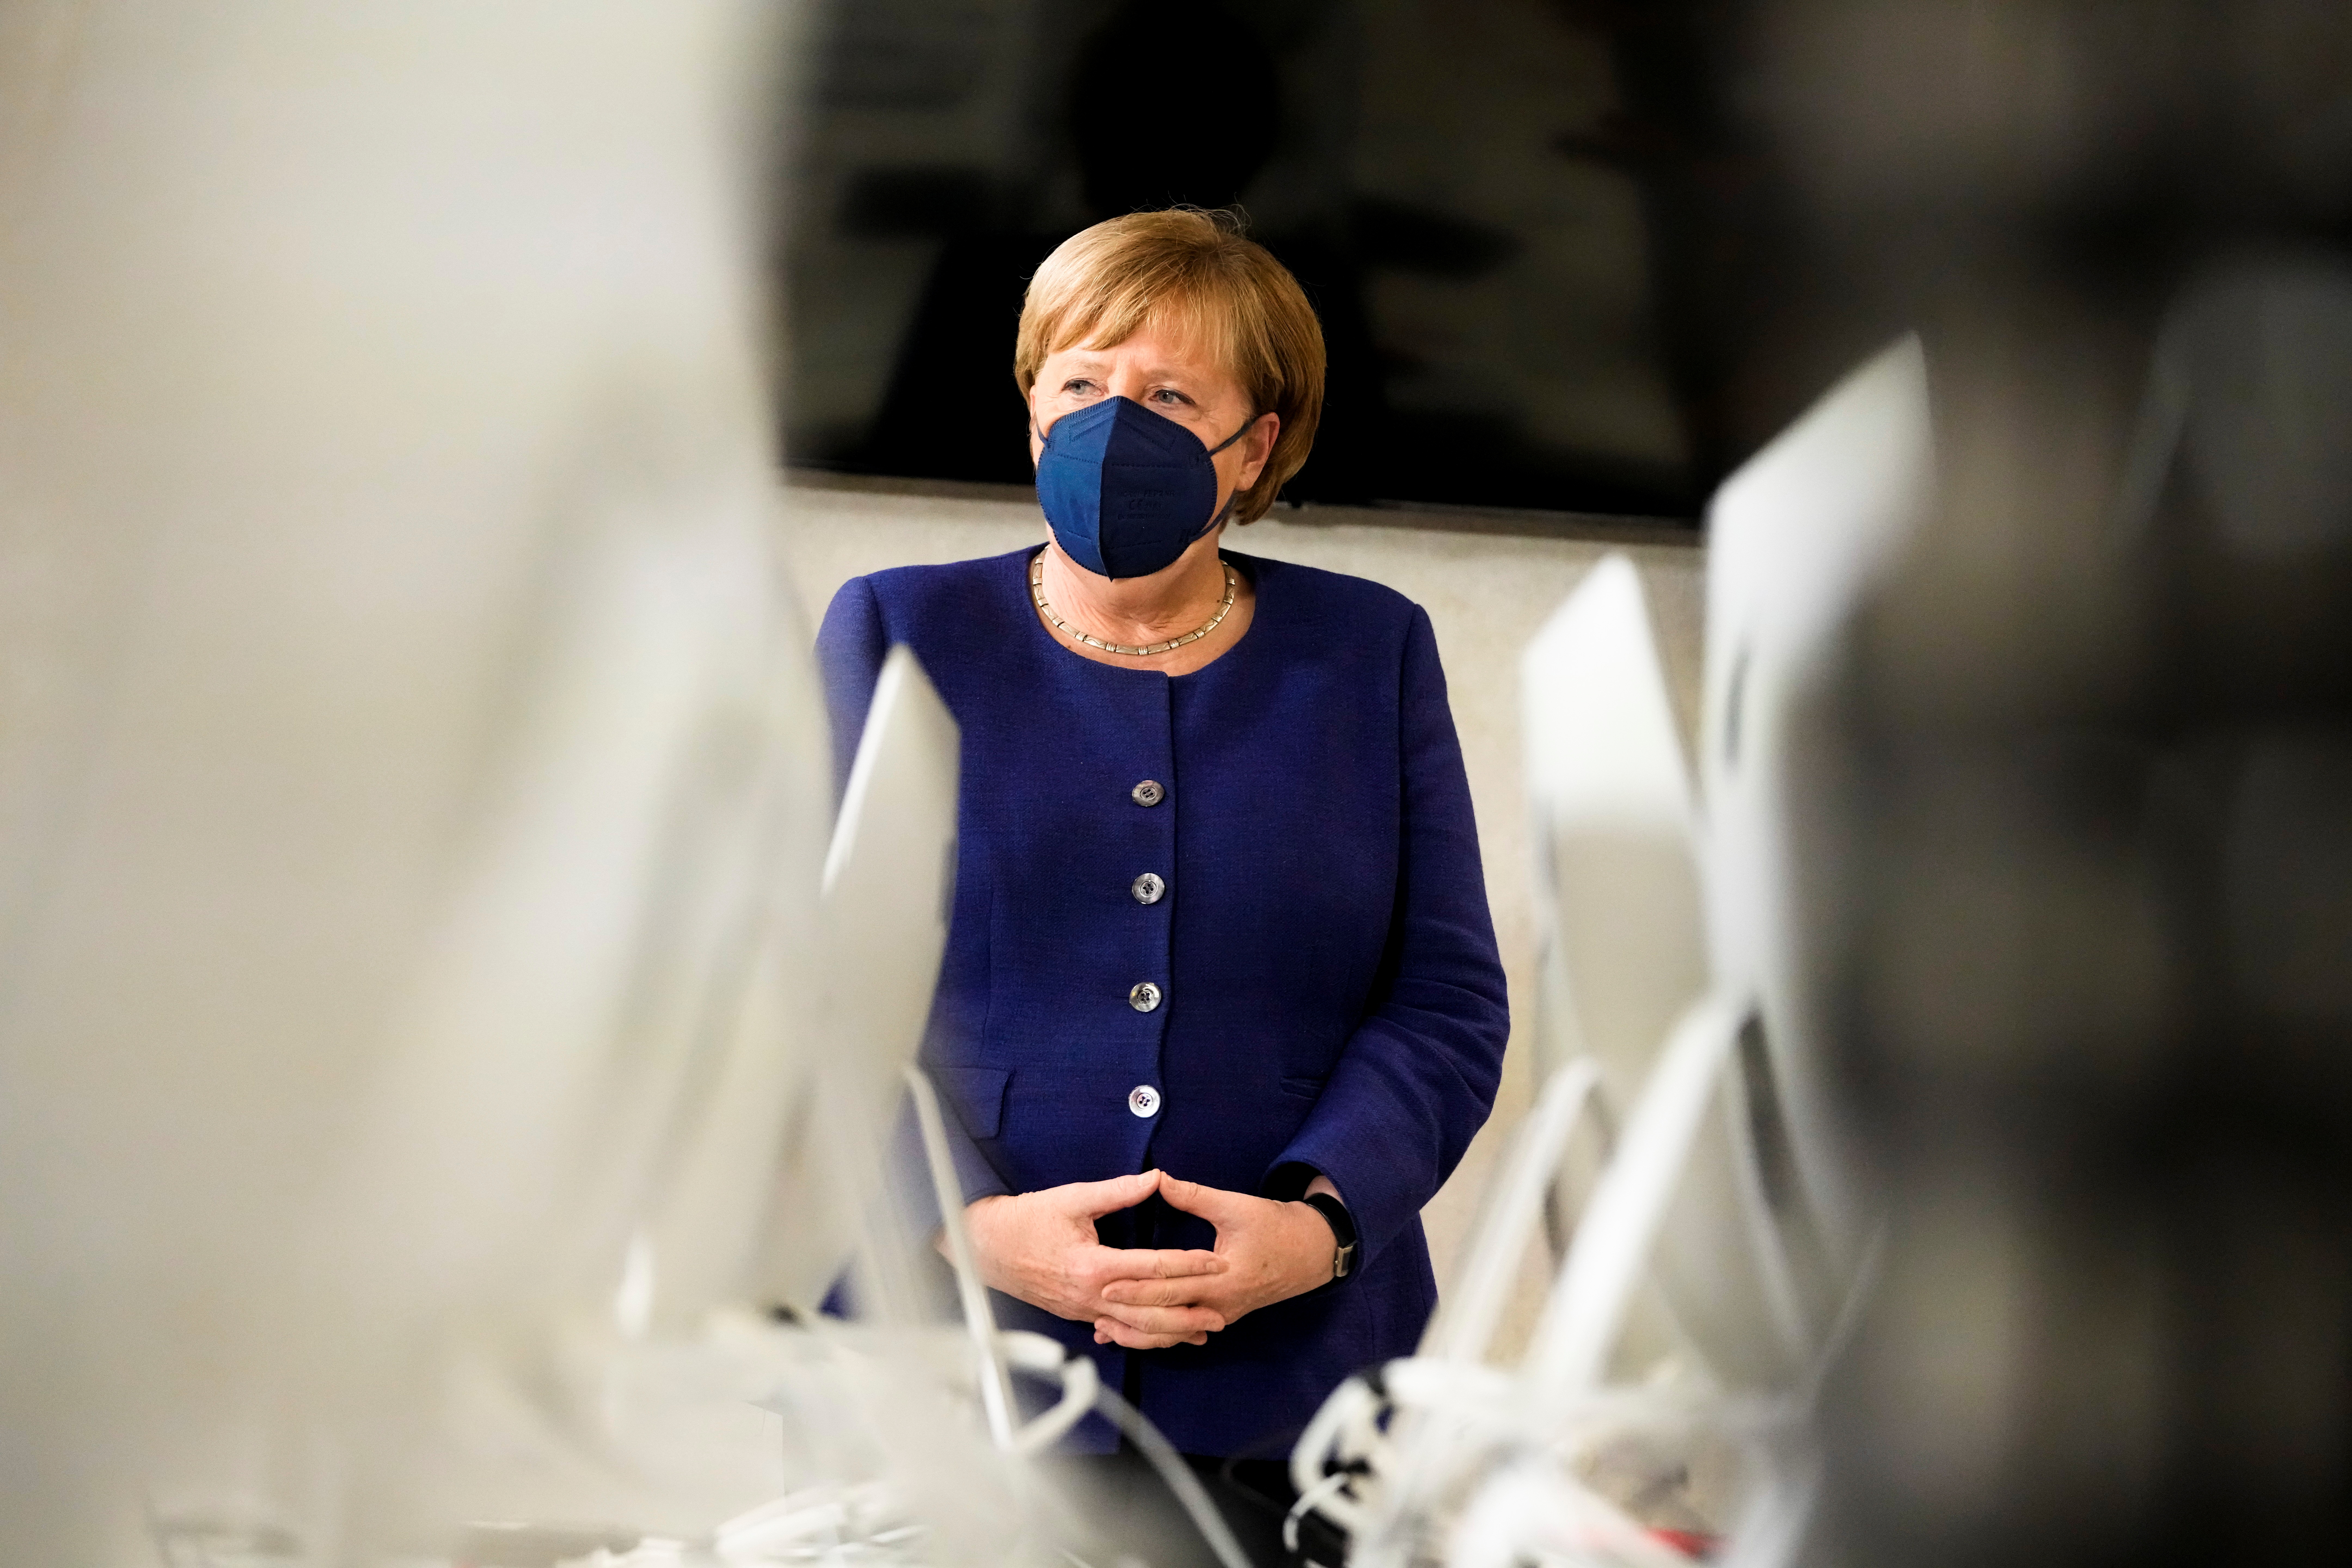 German Chancellor Angela Merkel listens to students during her visit at the TUMO Center for Creative Technologies, in Berlin, Germany, November 22, 2021. Markus Schreiber/Pool via REUTERS